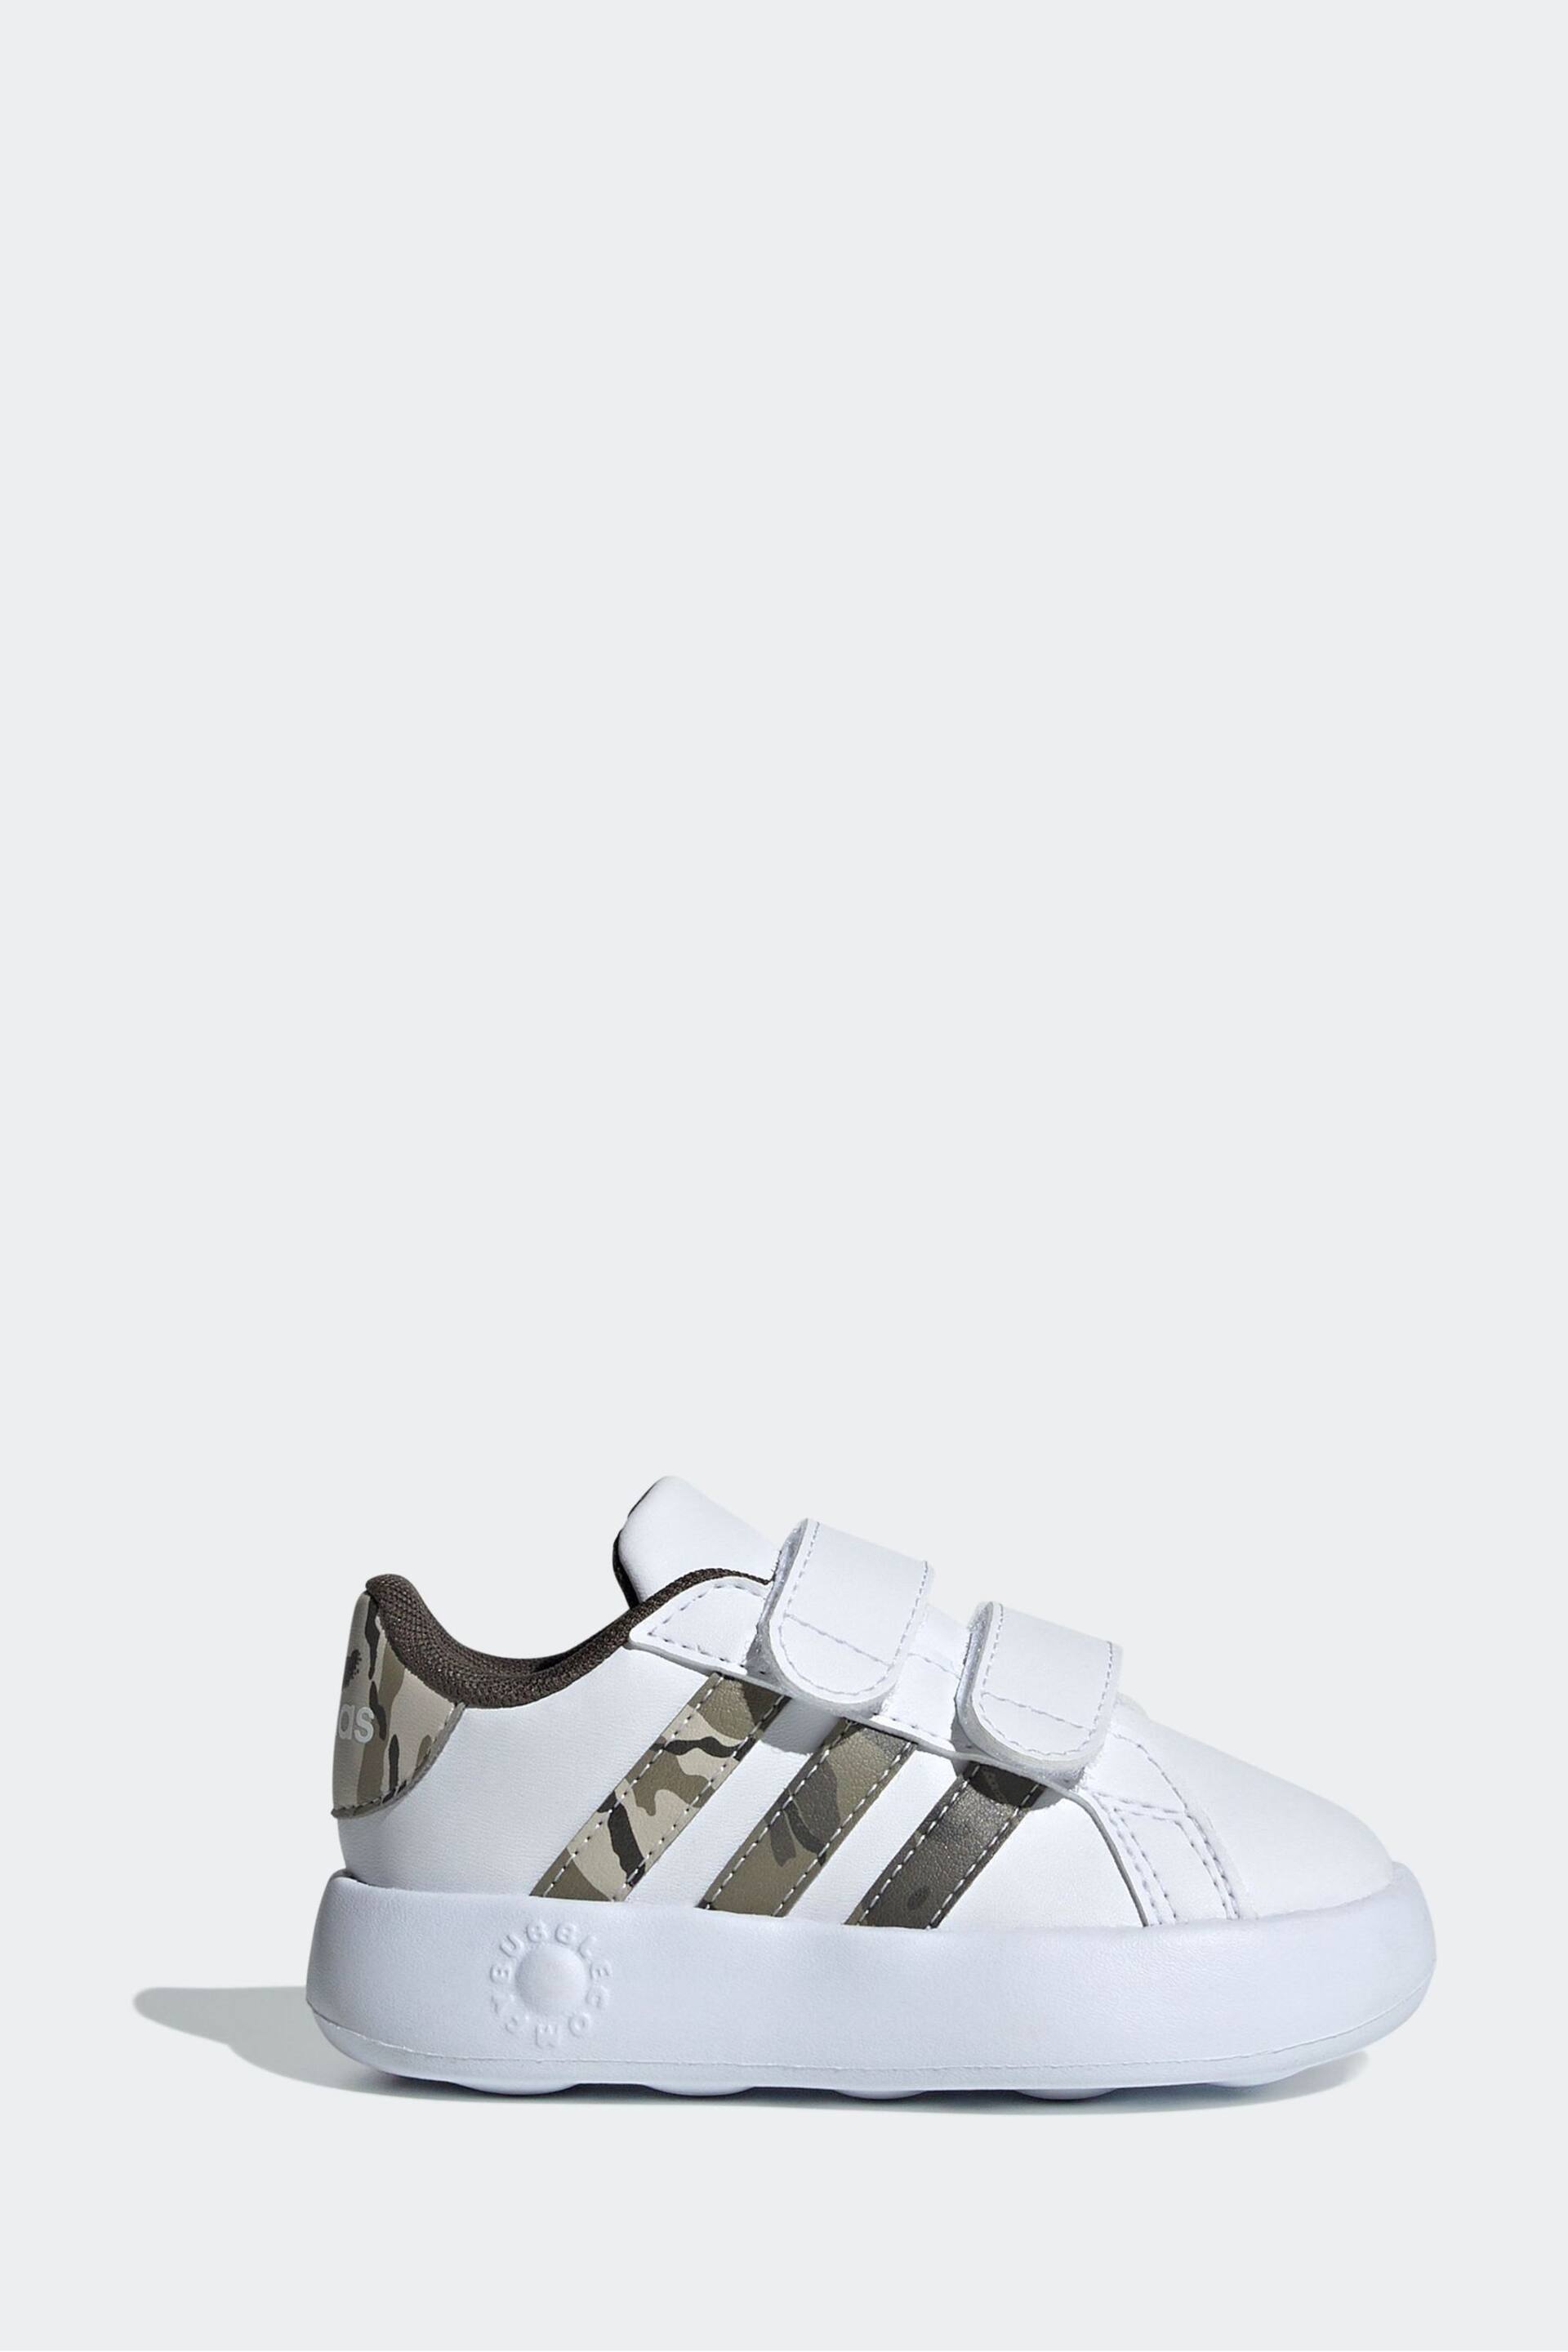 adidas White/Pink Sportswear Grand Court 2.0 Trainers - Image 1 of 8